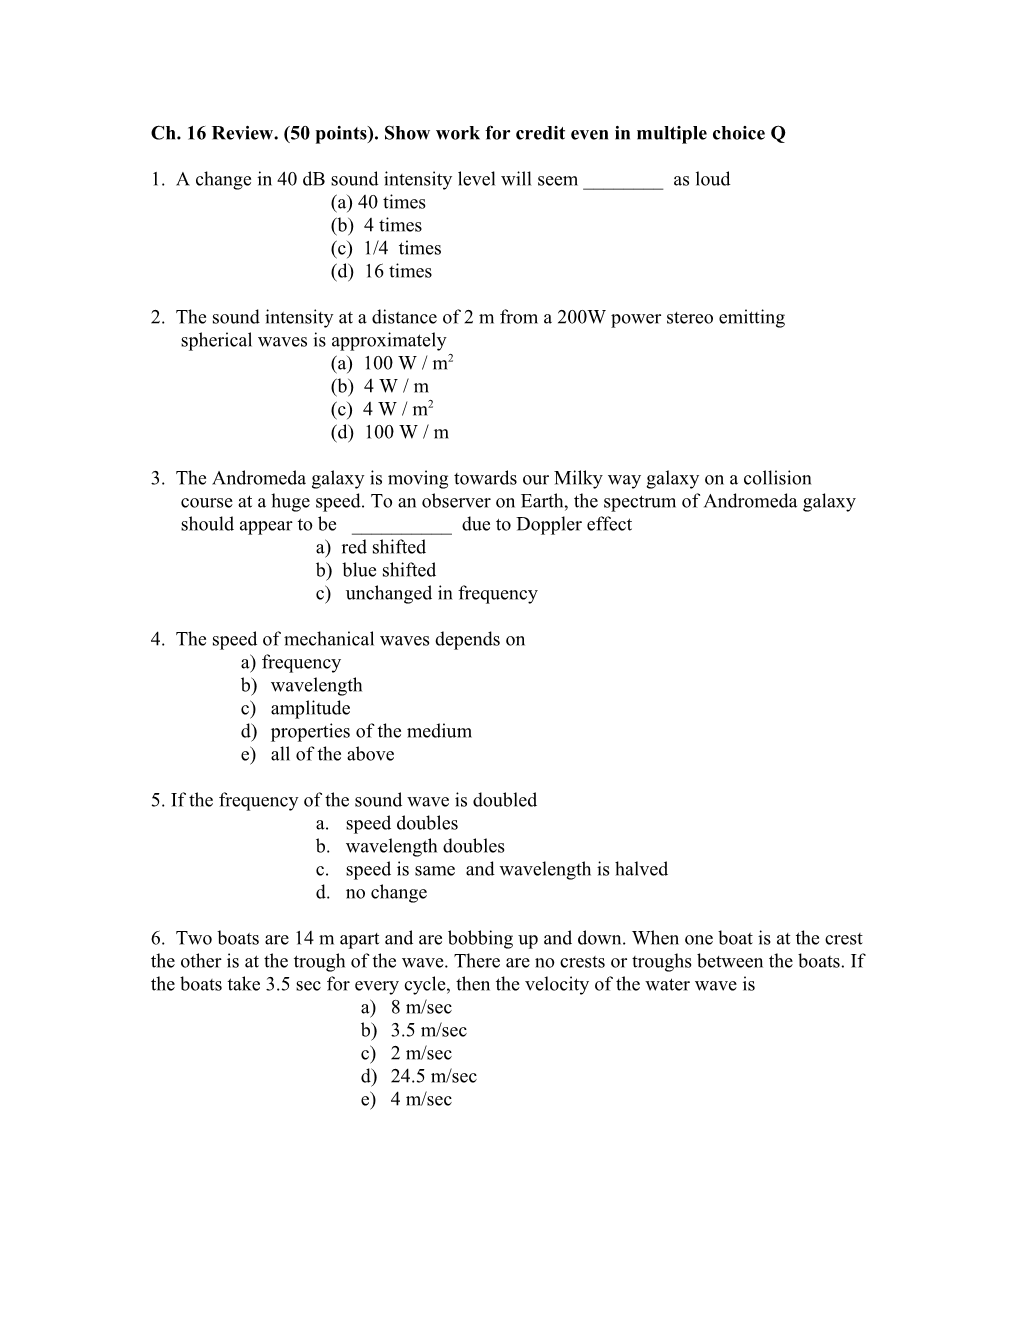 Ch. 16 Review. (50 Points). Show Work for Credit Even in Multiple Choice Q